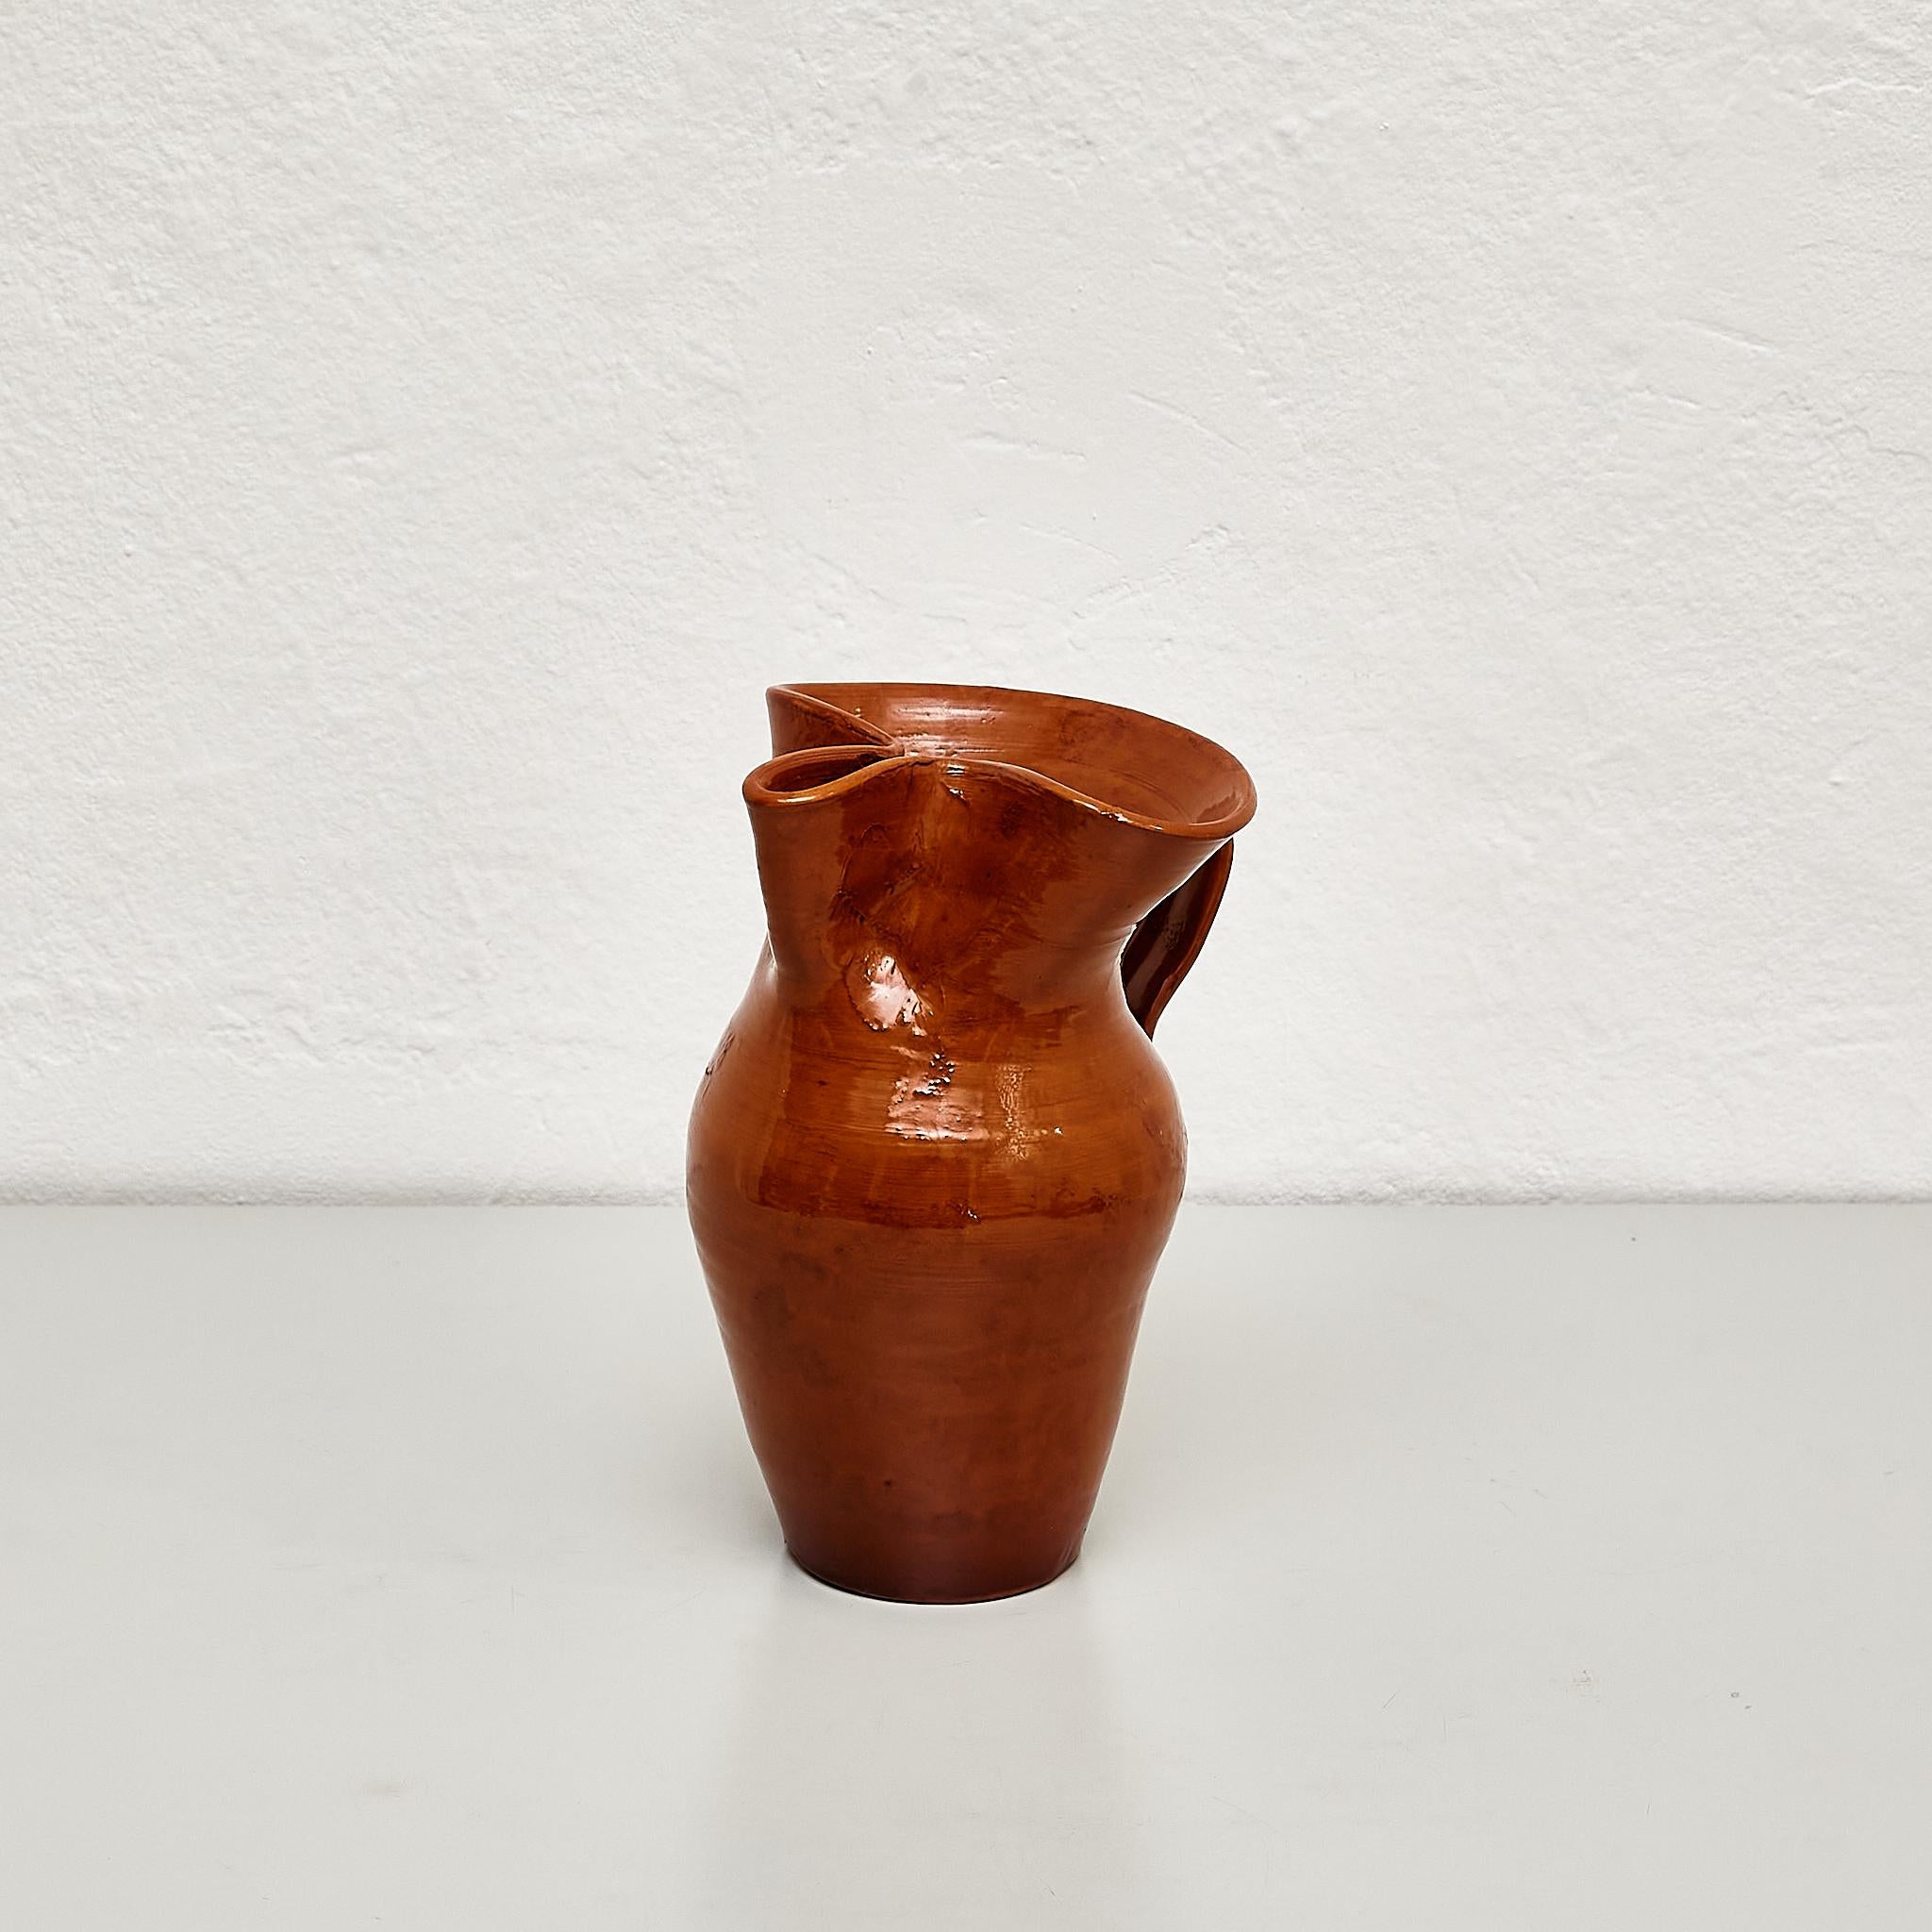 Mid 20th century traditional Spanish ceramic vase.

Manufactured in Spain.

In original condition with minor wear consistent of age and use, preserving a beautiful patina.

Materials: 
Ceramic

Important information regarding color(s) of